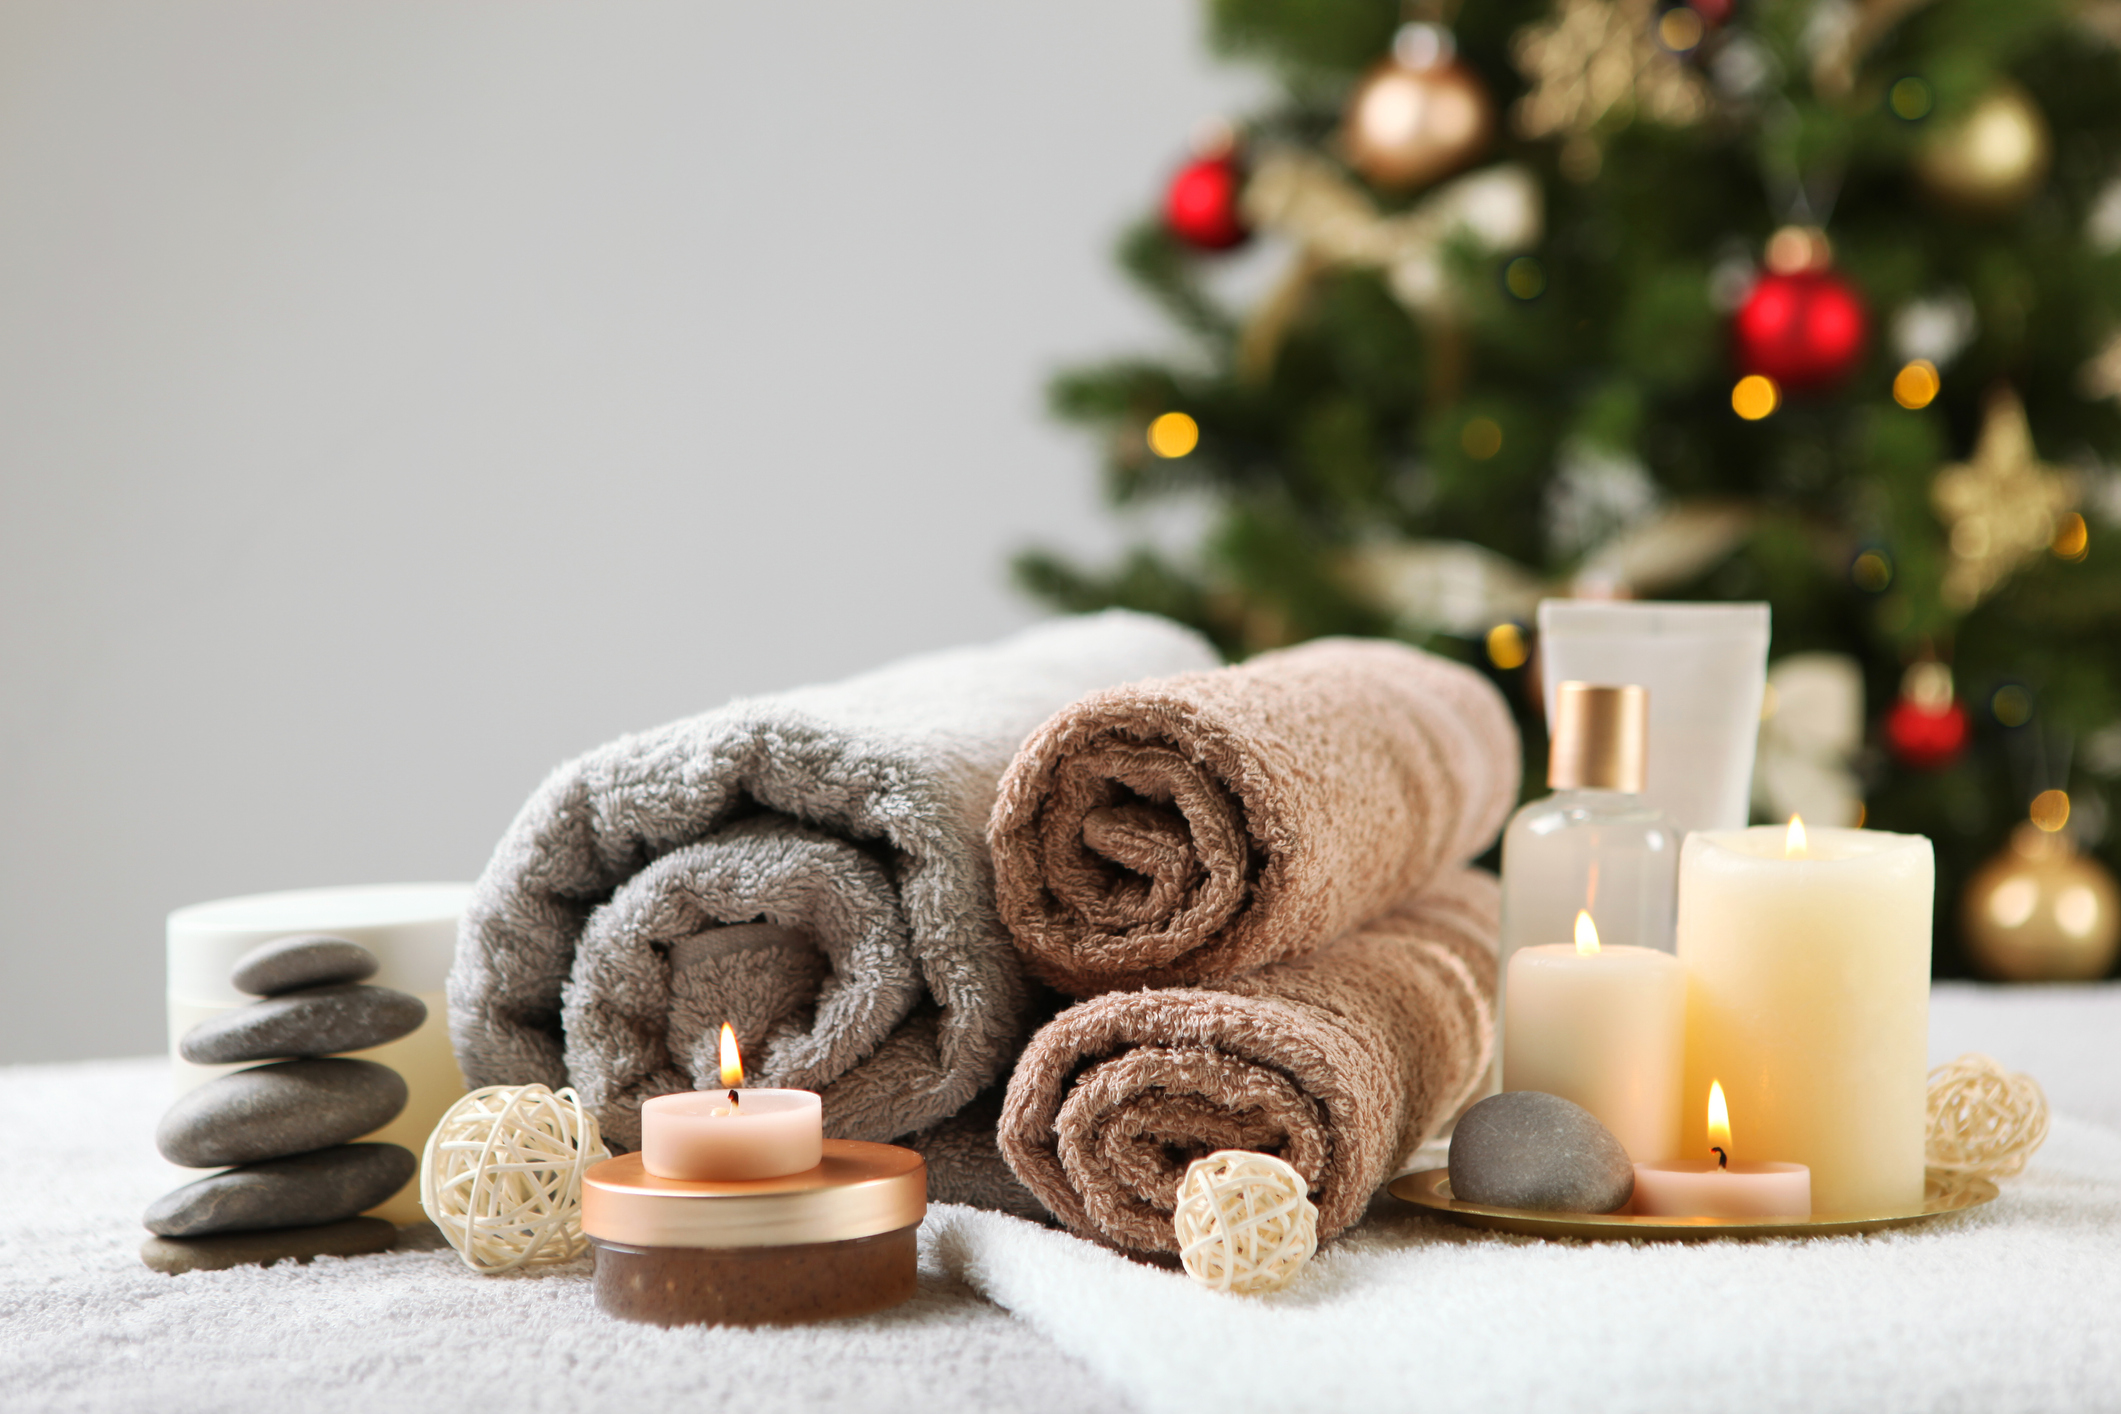 The Salon Owner’s Guide to Black Friday & Christmas